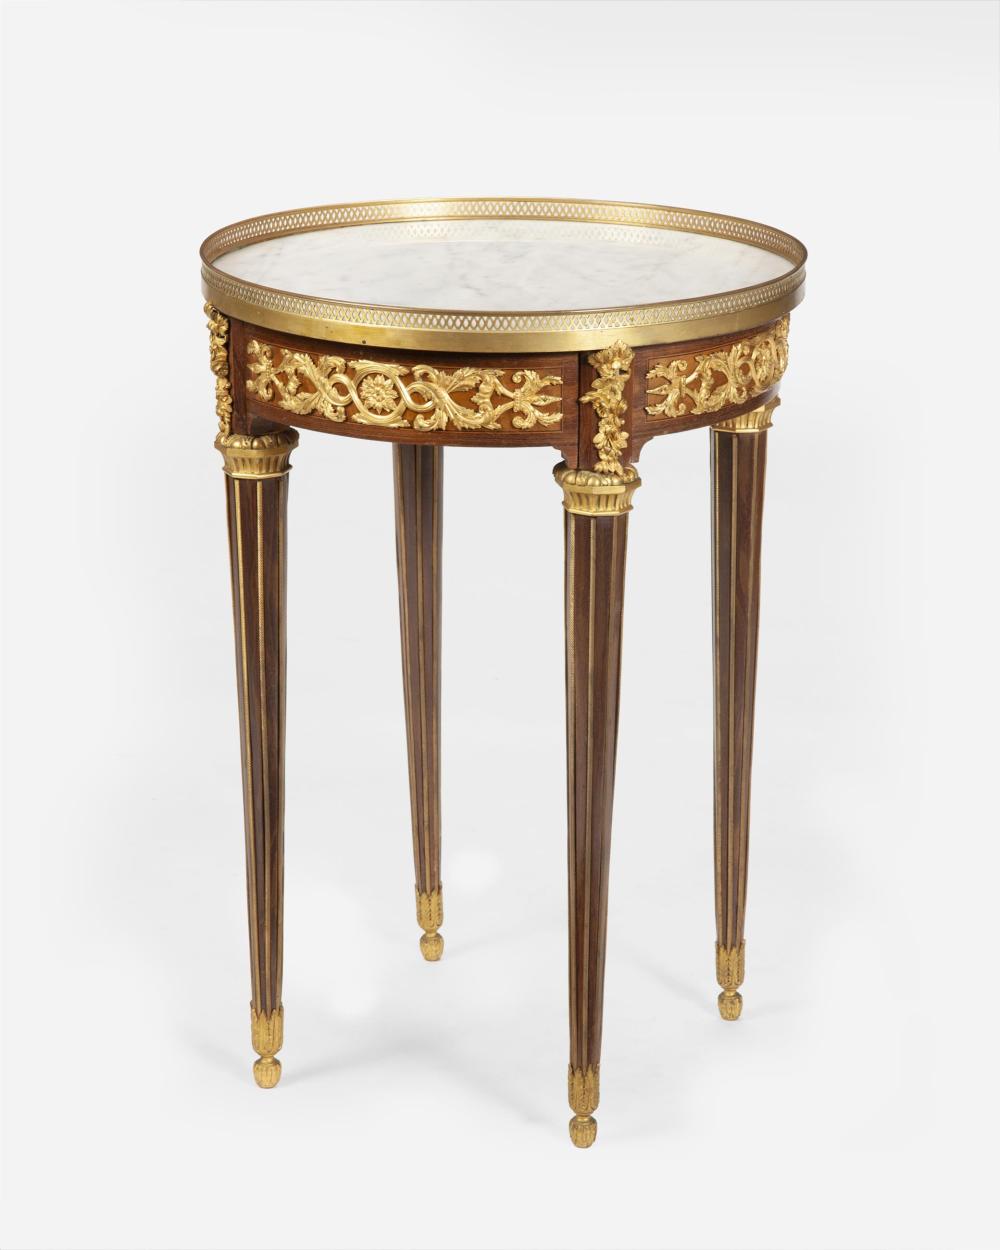 A LOUIS XVI-STYLE MARBLE-TOPPED